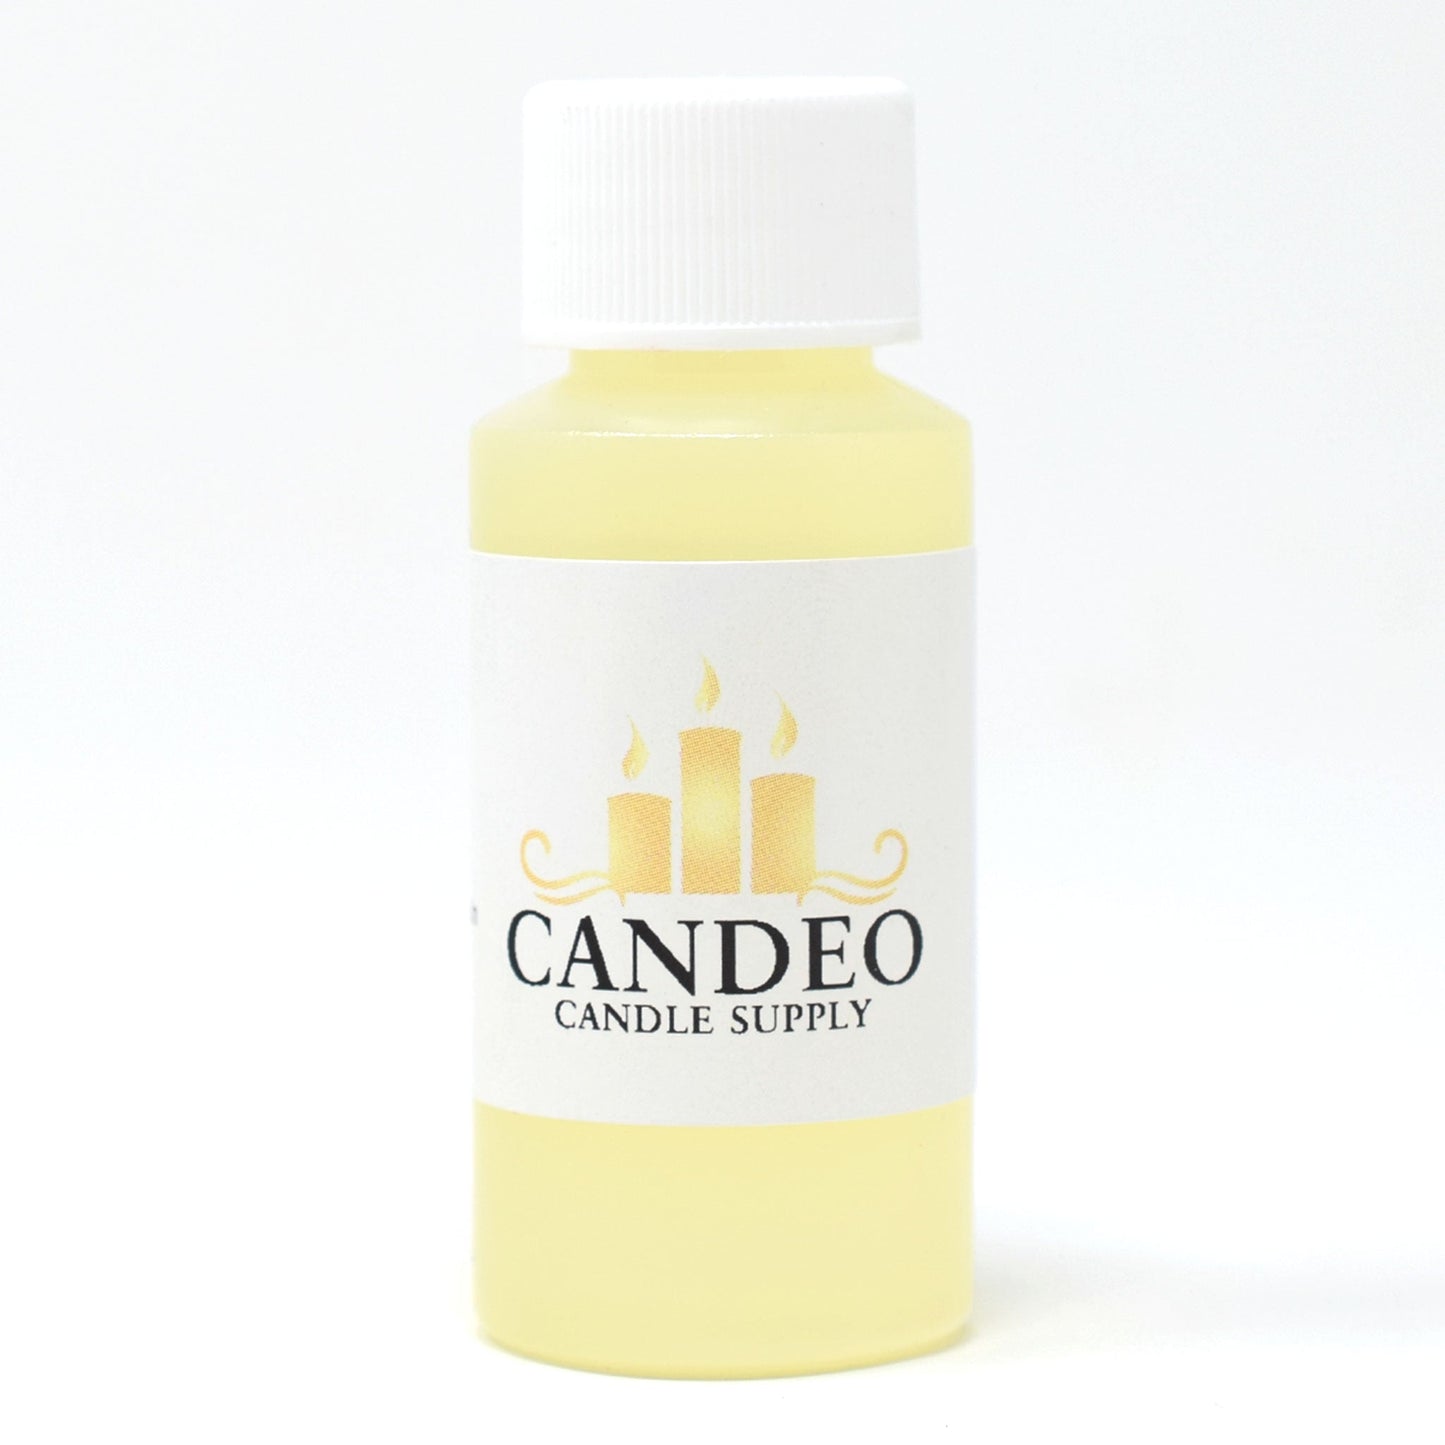 Smoke & Odor Eliminator Fragrance Oil - Candeo Candle Supply